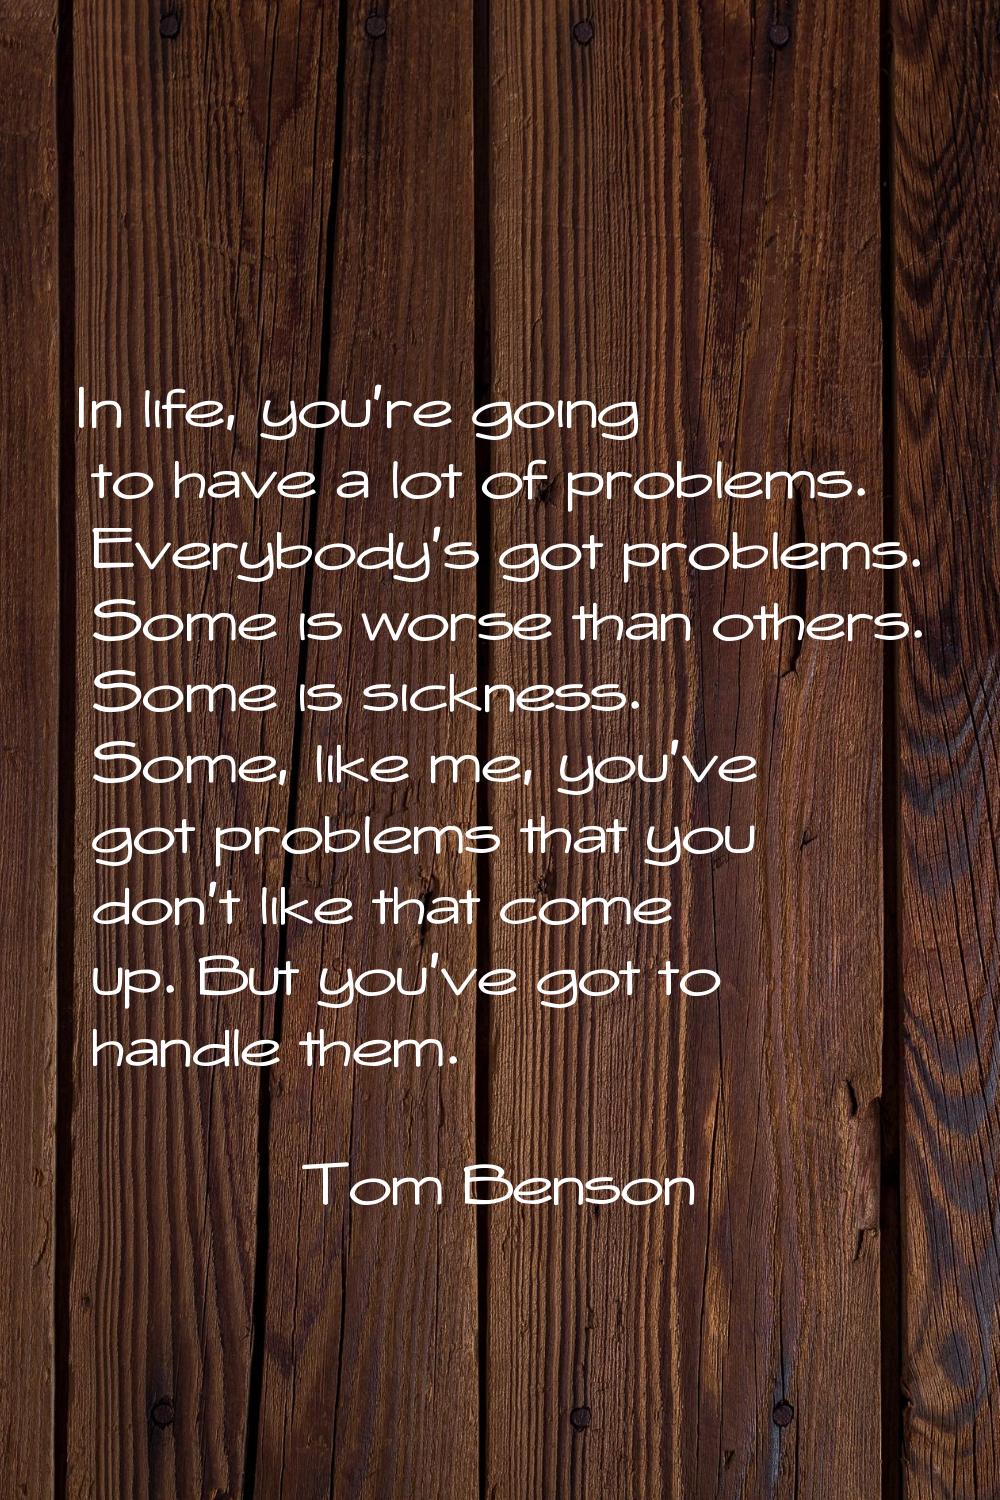 In life, you're going to have a lot of problems. Everybody's got problems. Some is worse than other